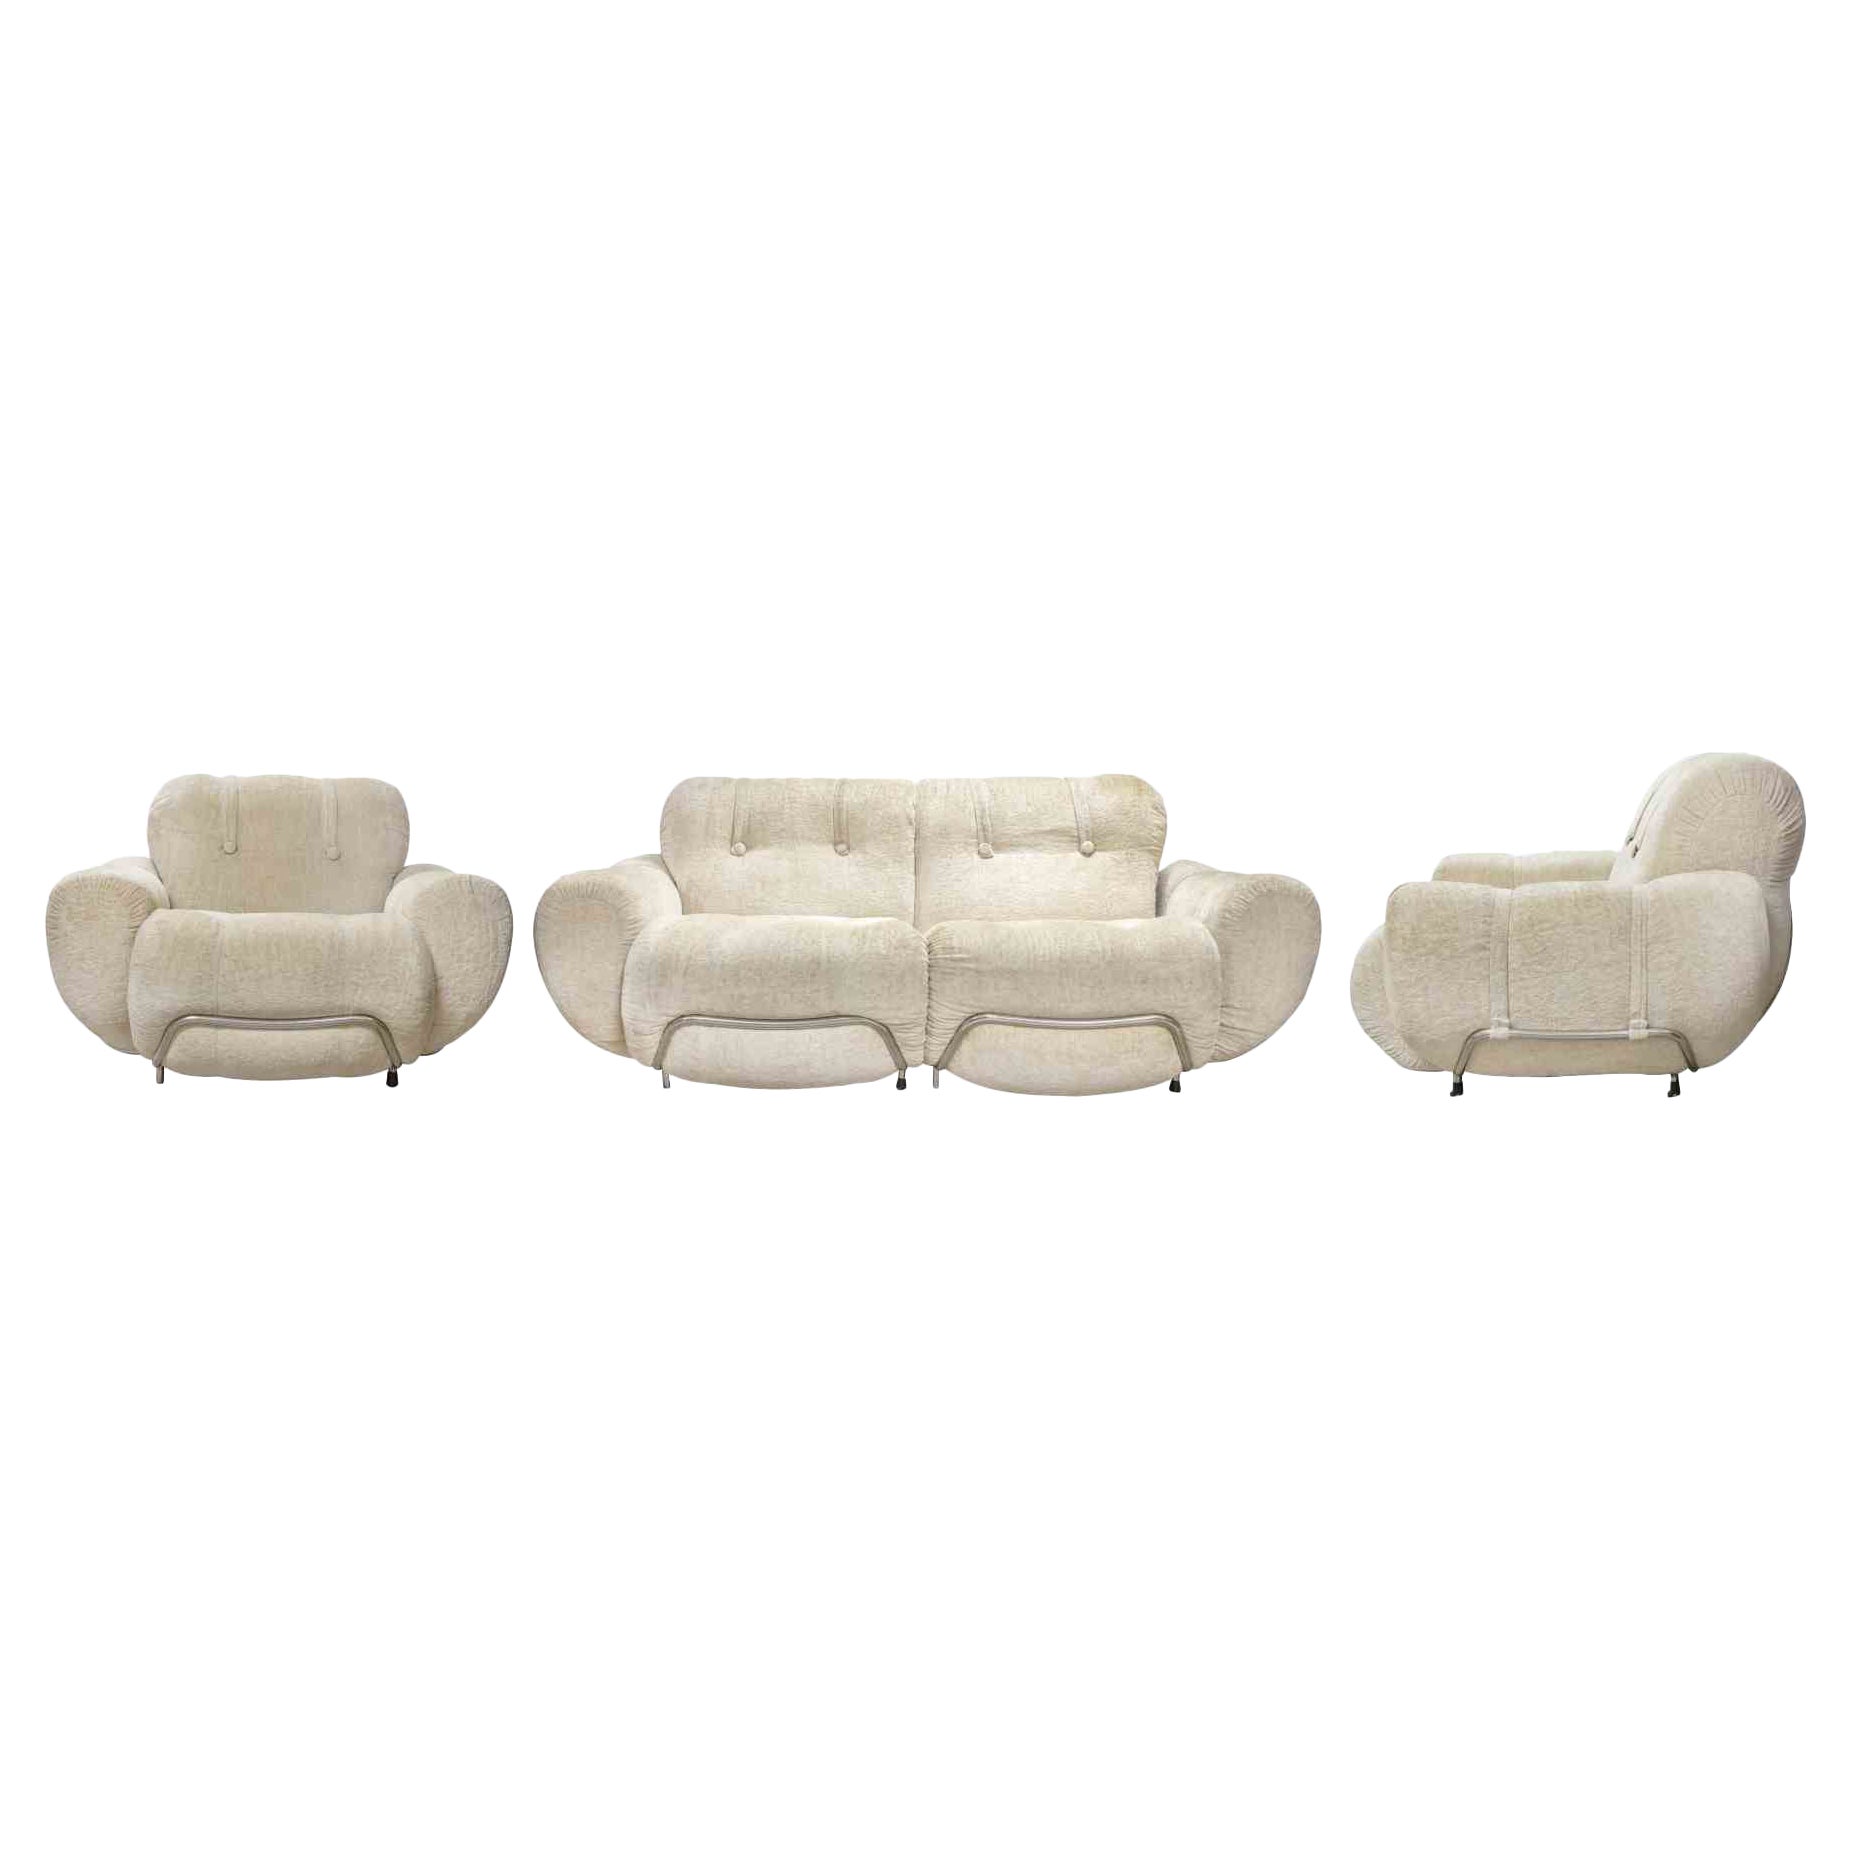 Sofa and Armchairs Set in the Style of Adriano Piazzesi, 1970s For Sale